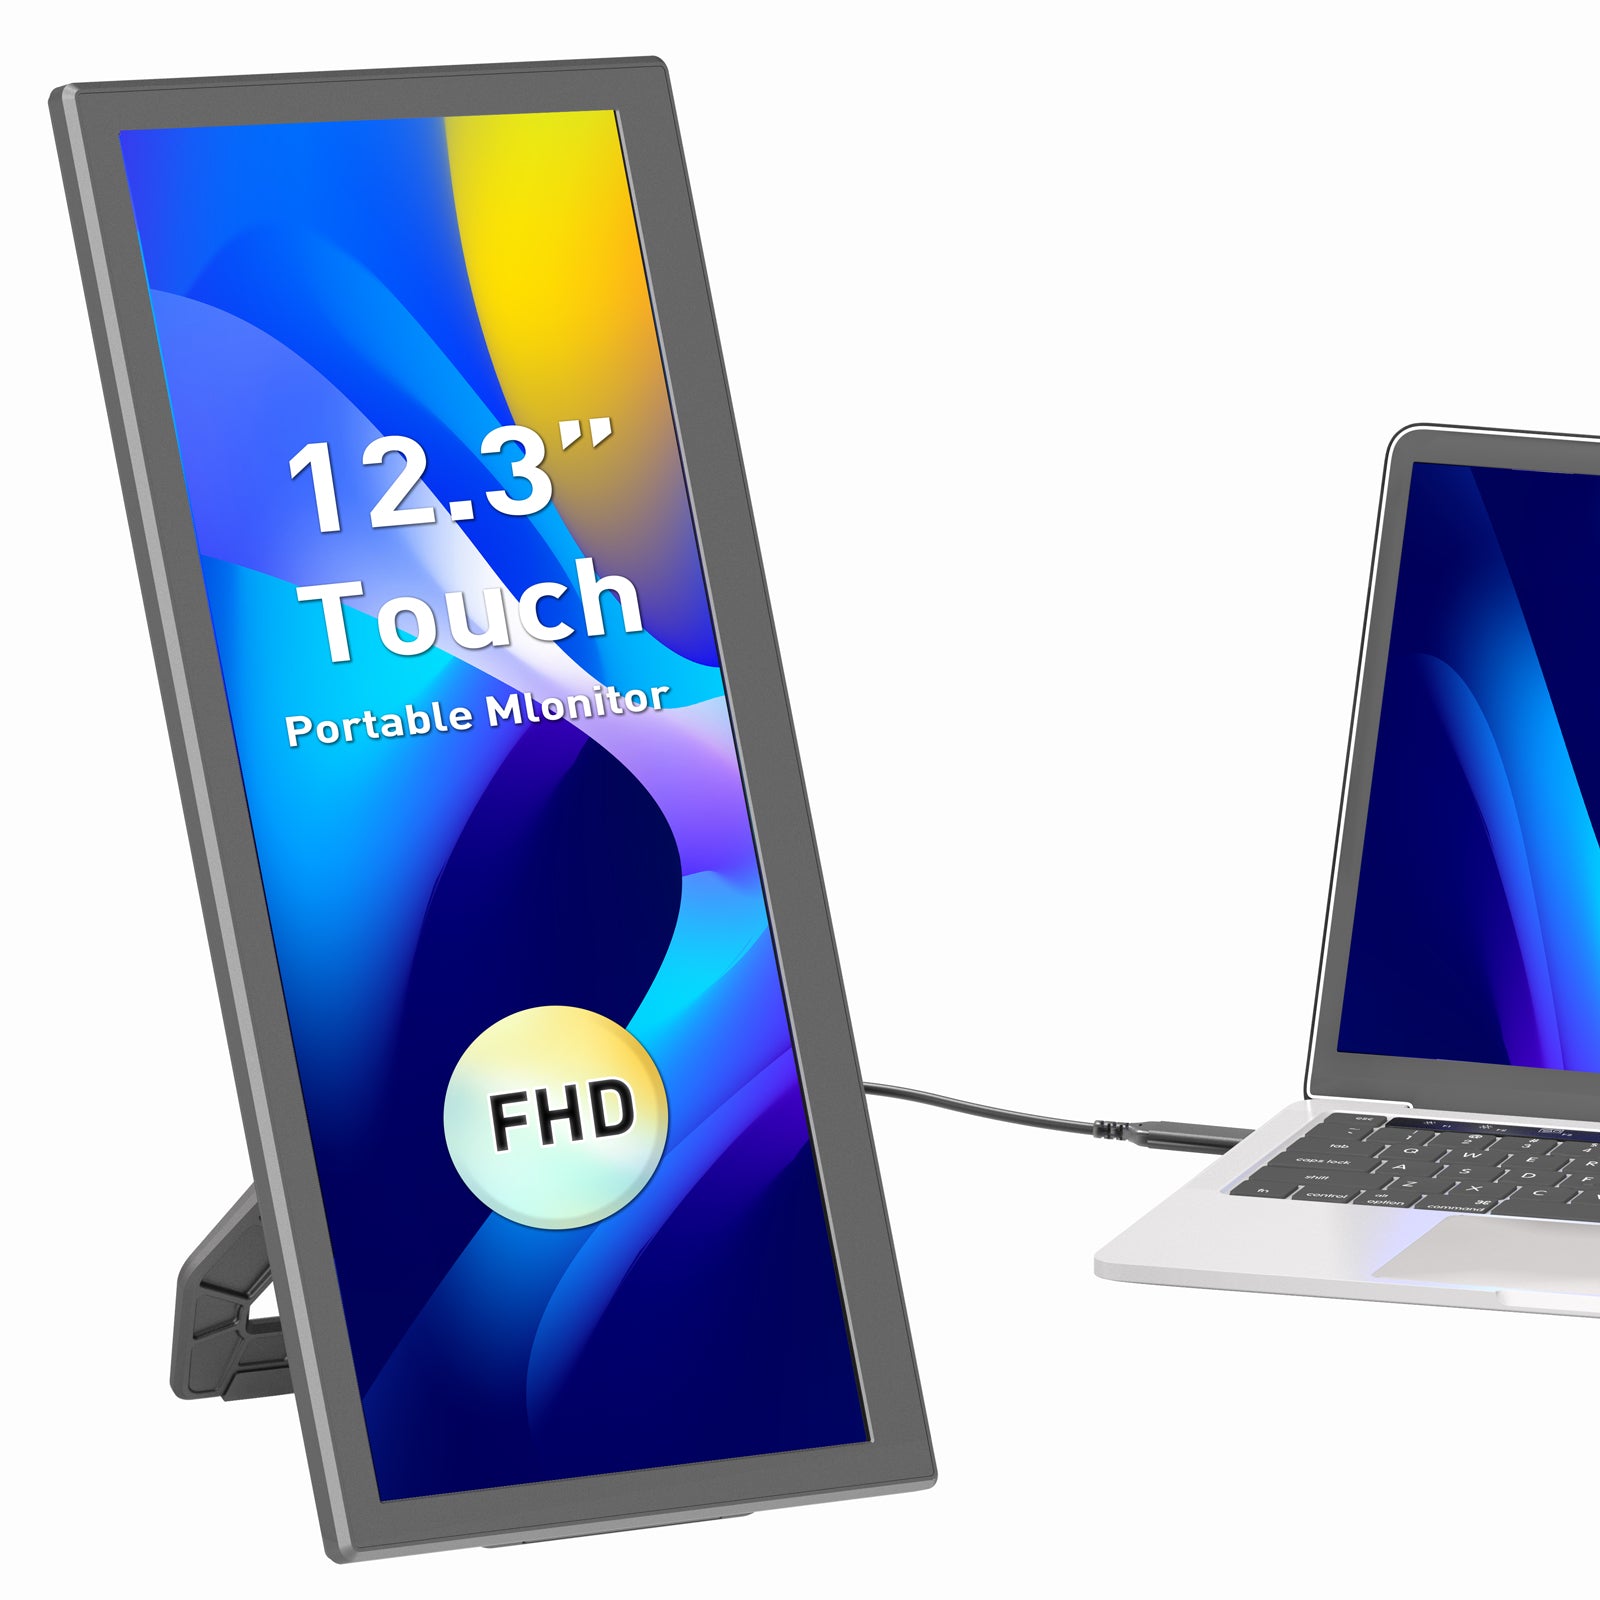 Maxfree L3 12.3" Portable Monitor with Kick Stand